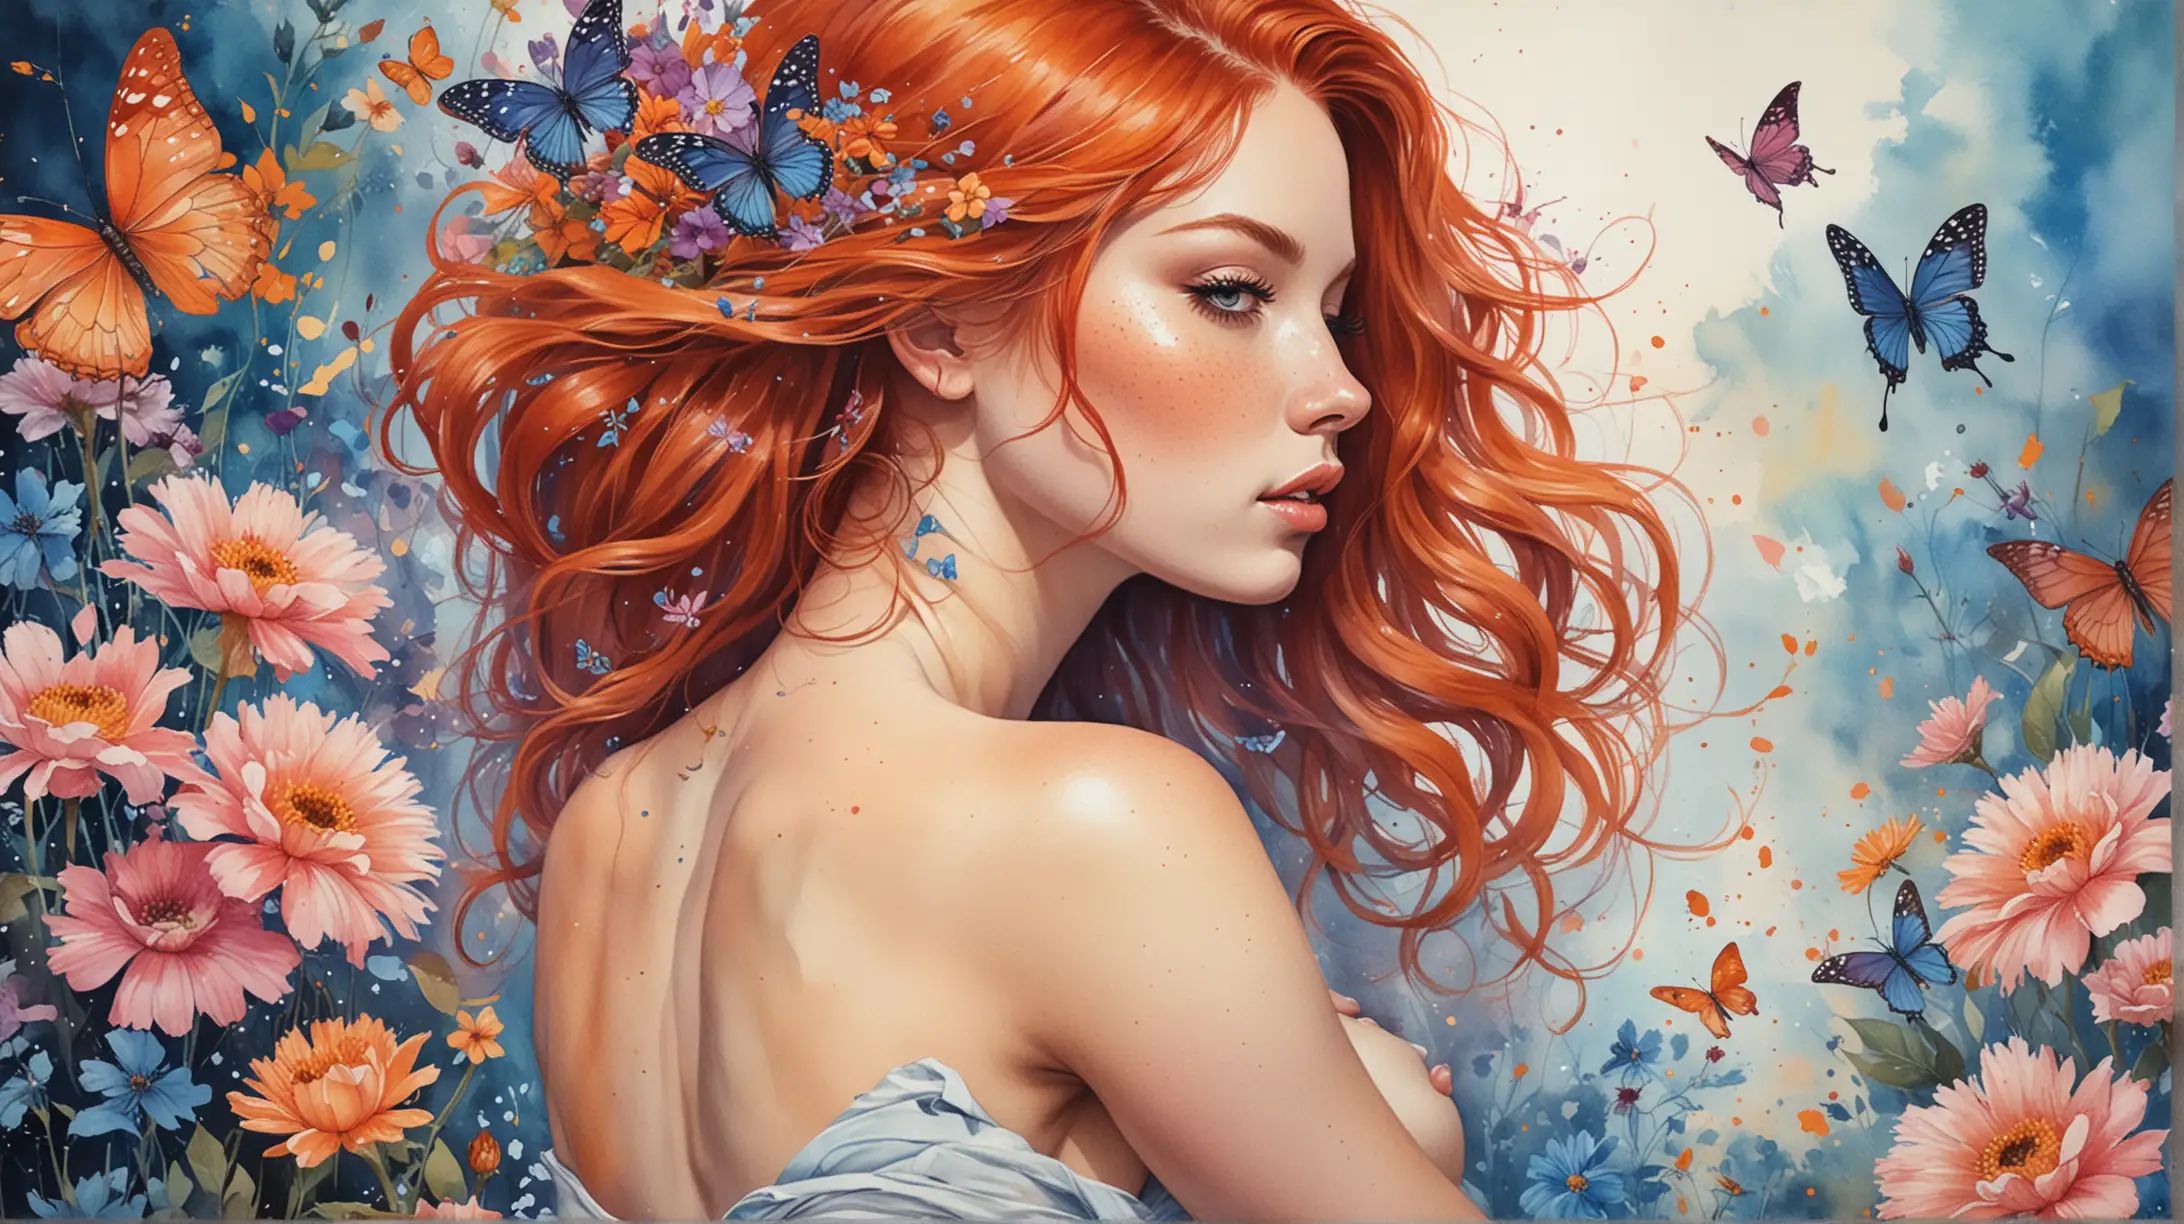 Beautiful Redhair Woman Surrounded by Floral Fantasy